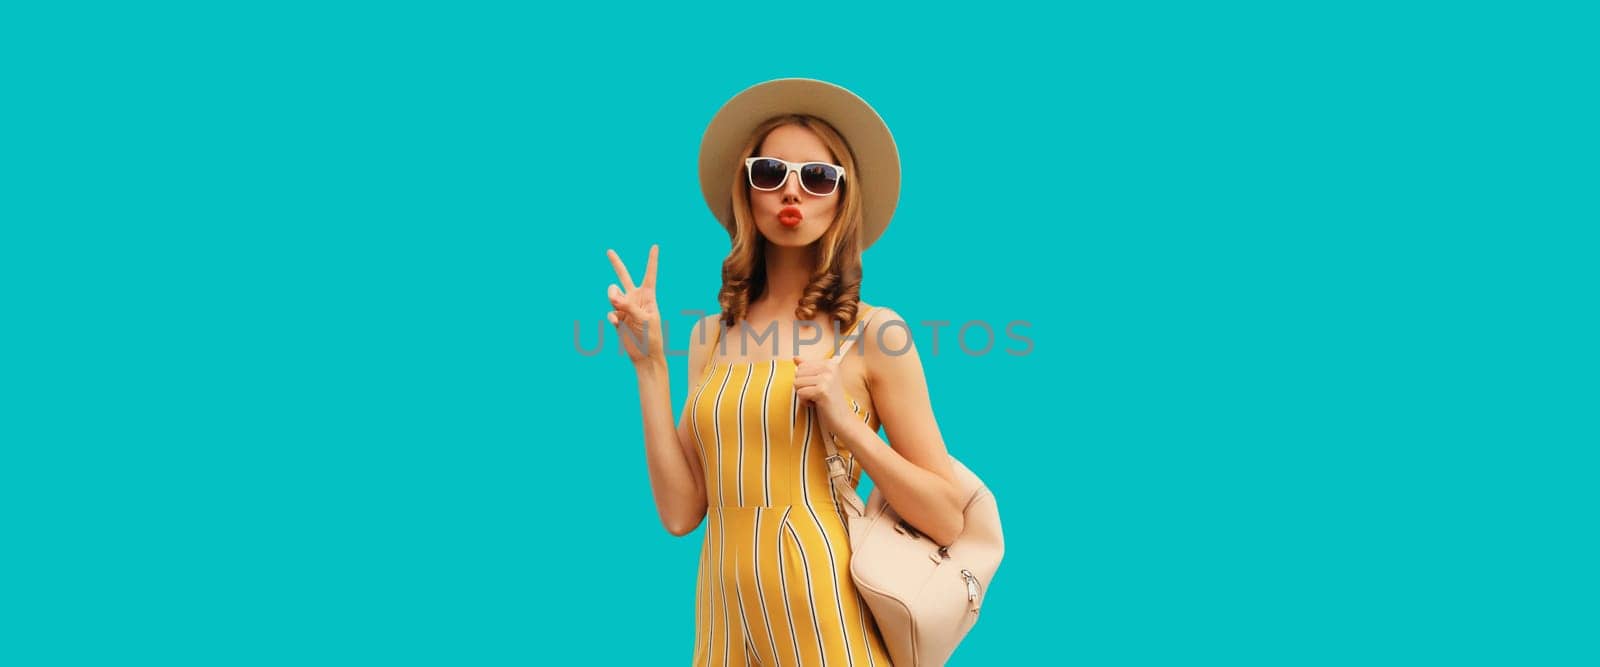 Beautiful blonde young woman blowing a kiss posing wearing summer hat, backpack on blue background by Rohappy